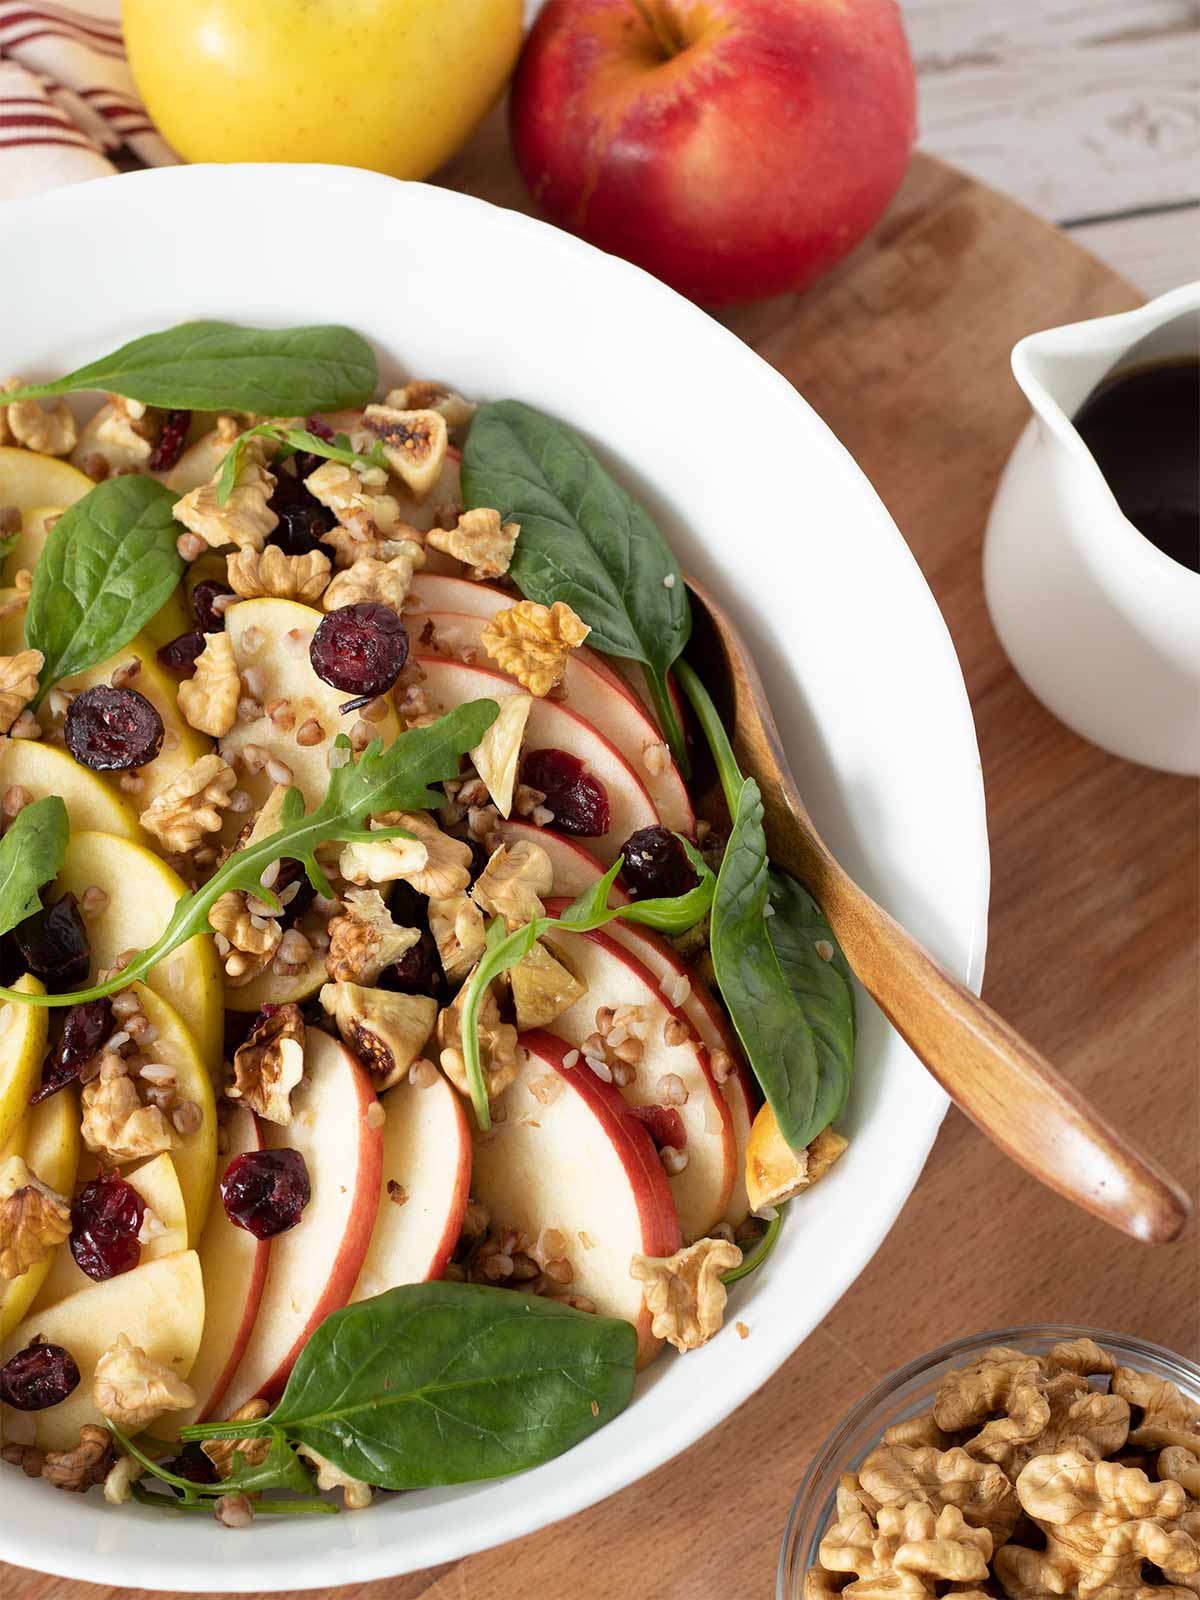 Best apple walnut salad in a bowl with fresh greens, dried cranberries, and buckwheat tossed with a homemade cinnamon maple dressing on wooden board